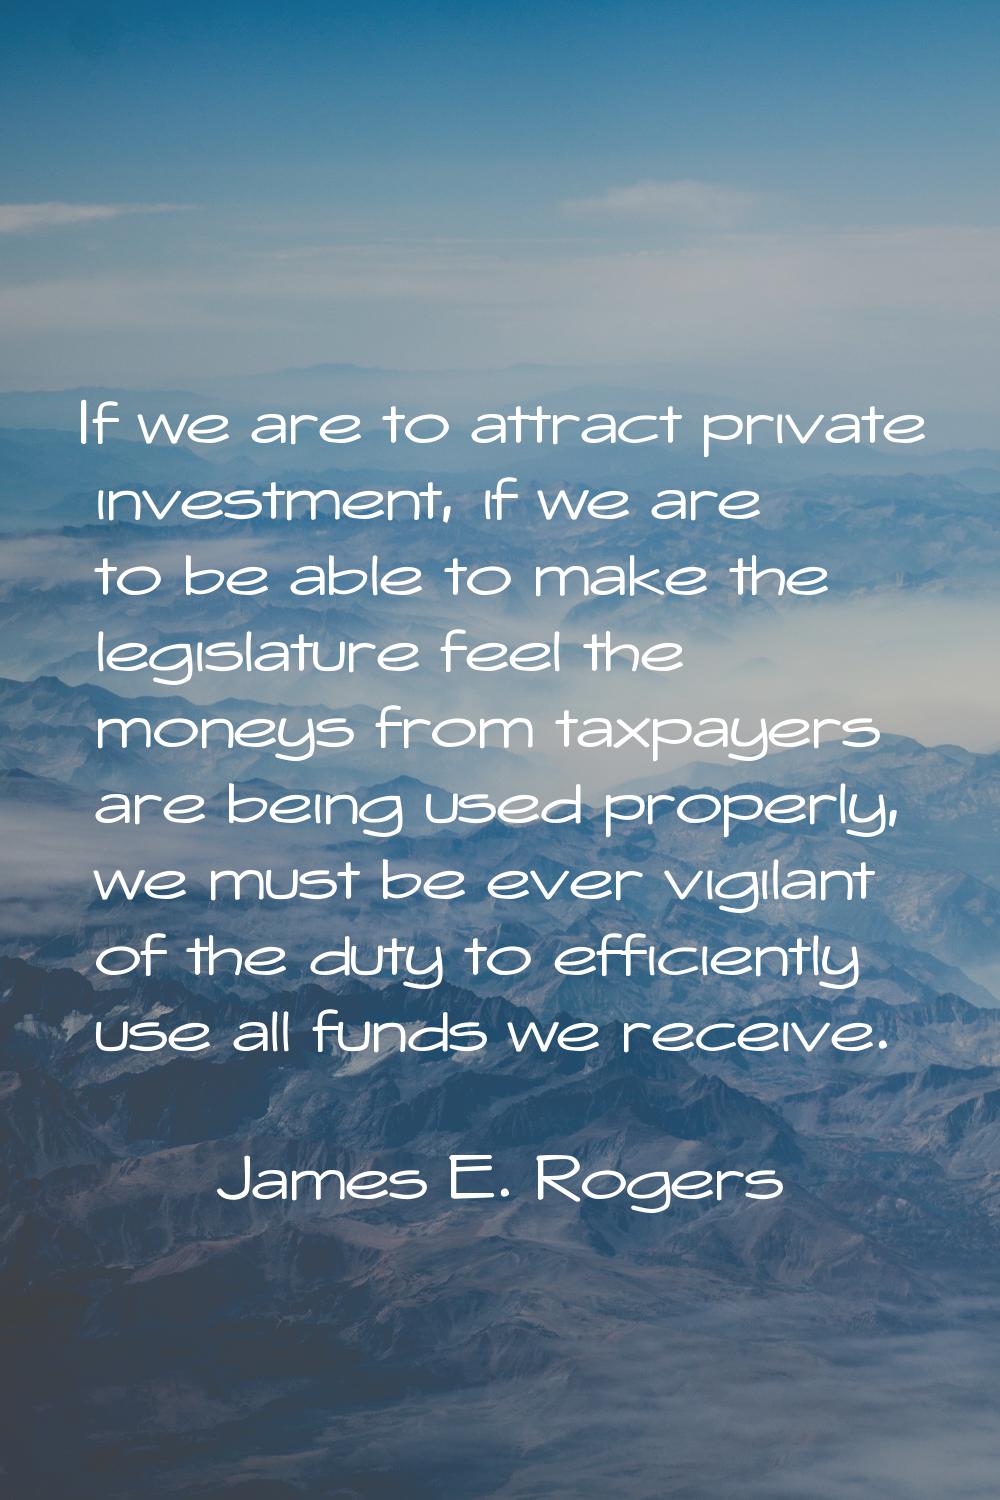 If we are to attract private investment, if we are to be able to make the legislature feel the mone